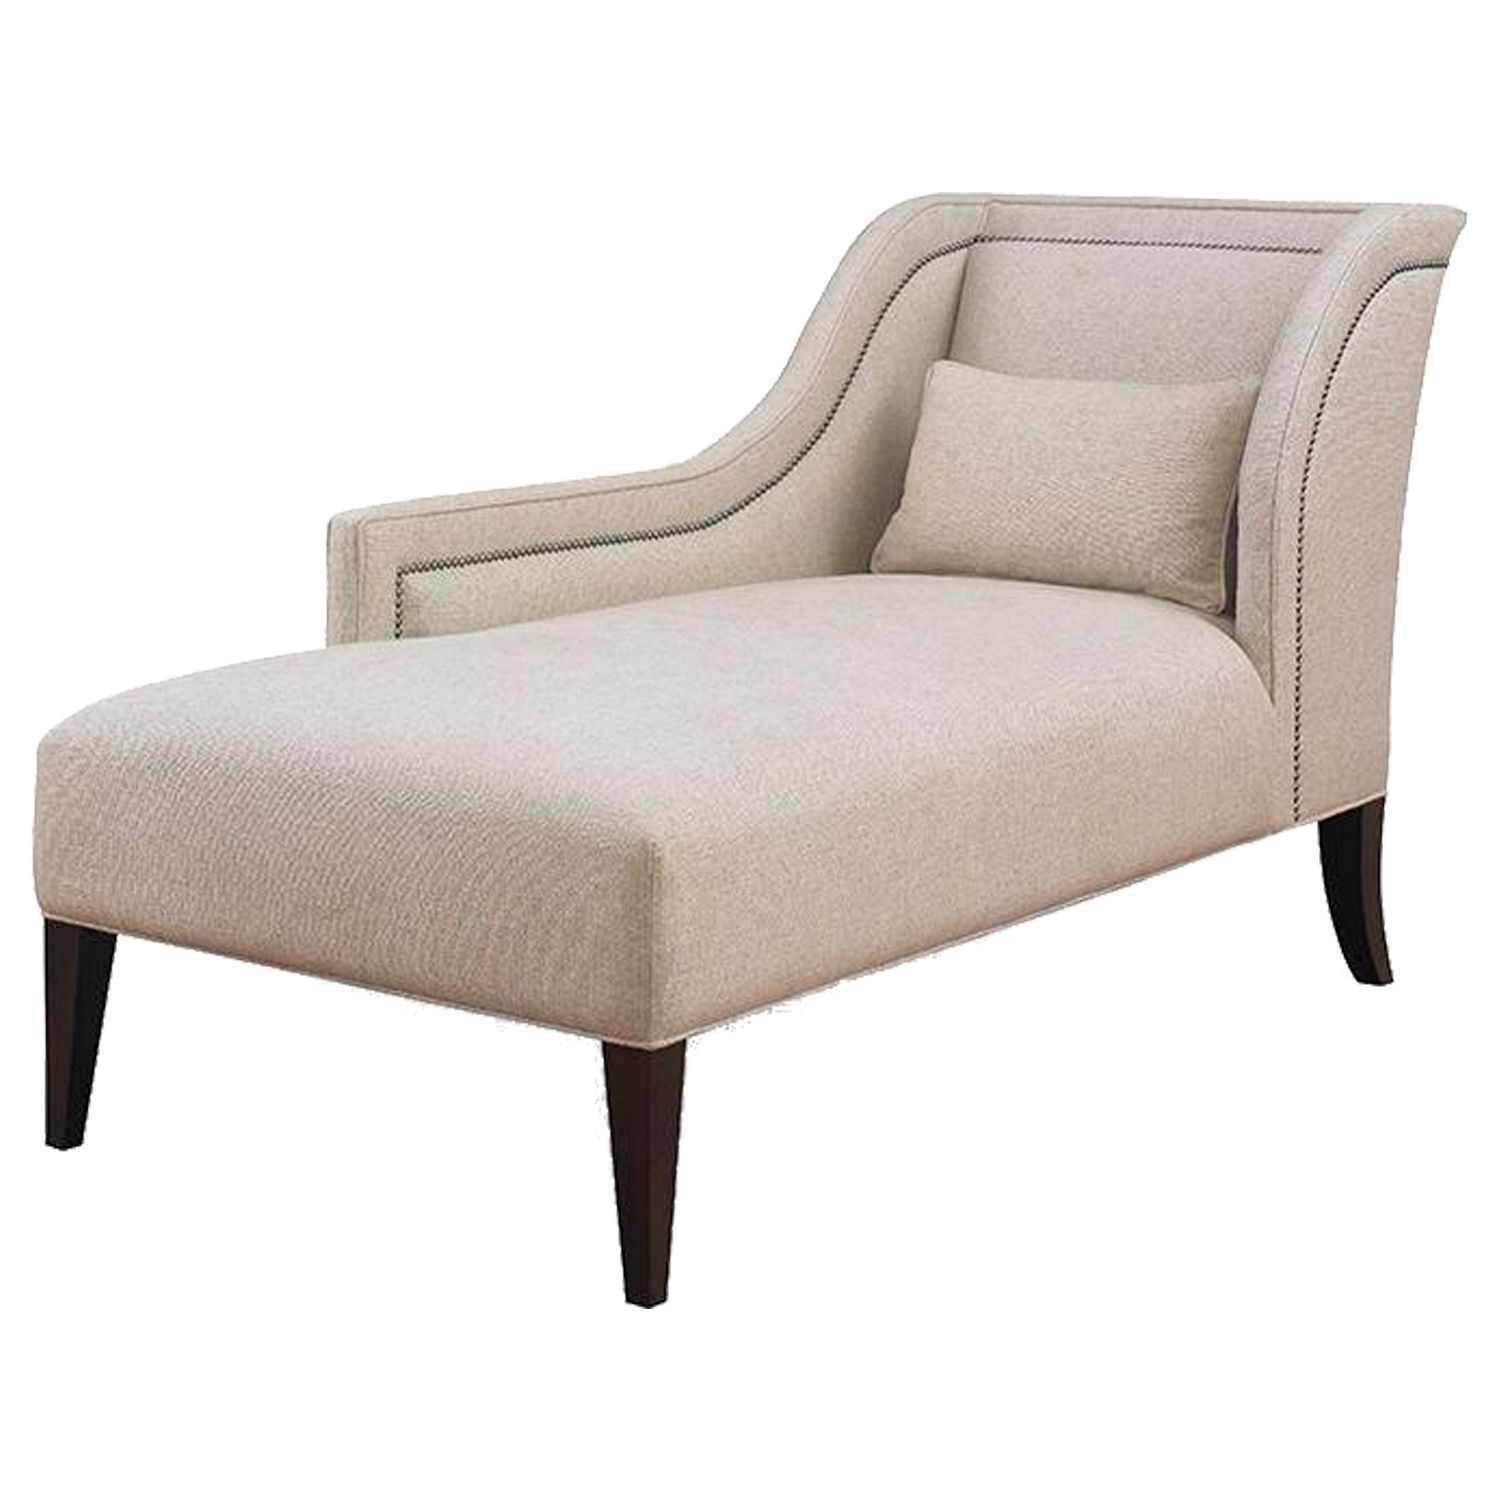 Popular Buy Pasadena One Arm Chaisekravet – Made To Order Designer Pertaining To Chaise Lounge Chairs With Arms (View 12 of 15)